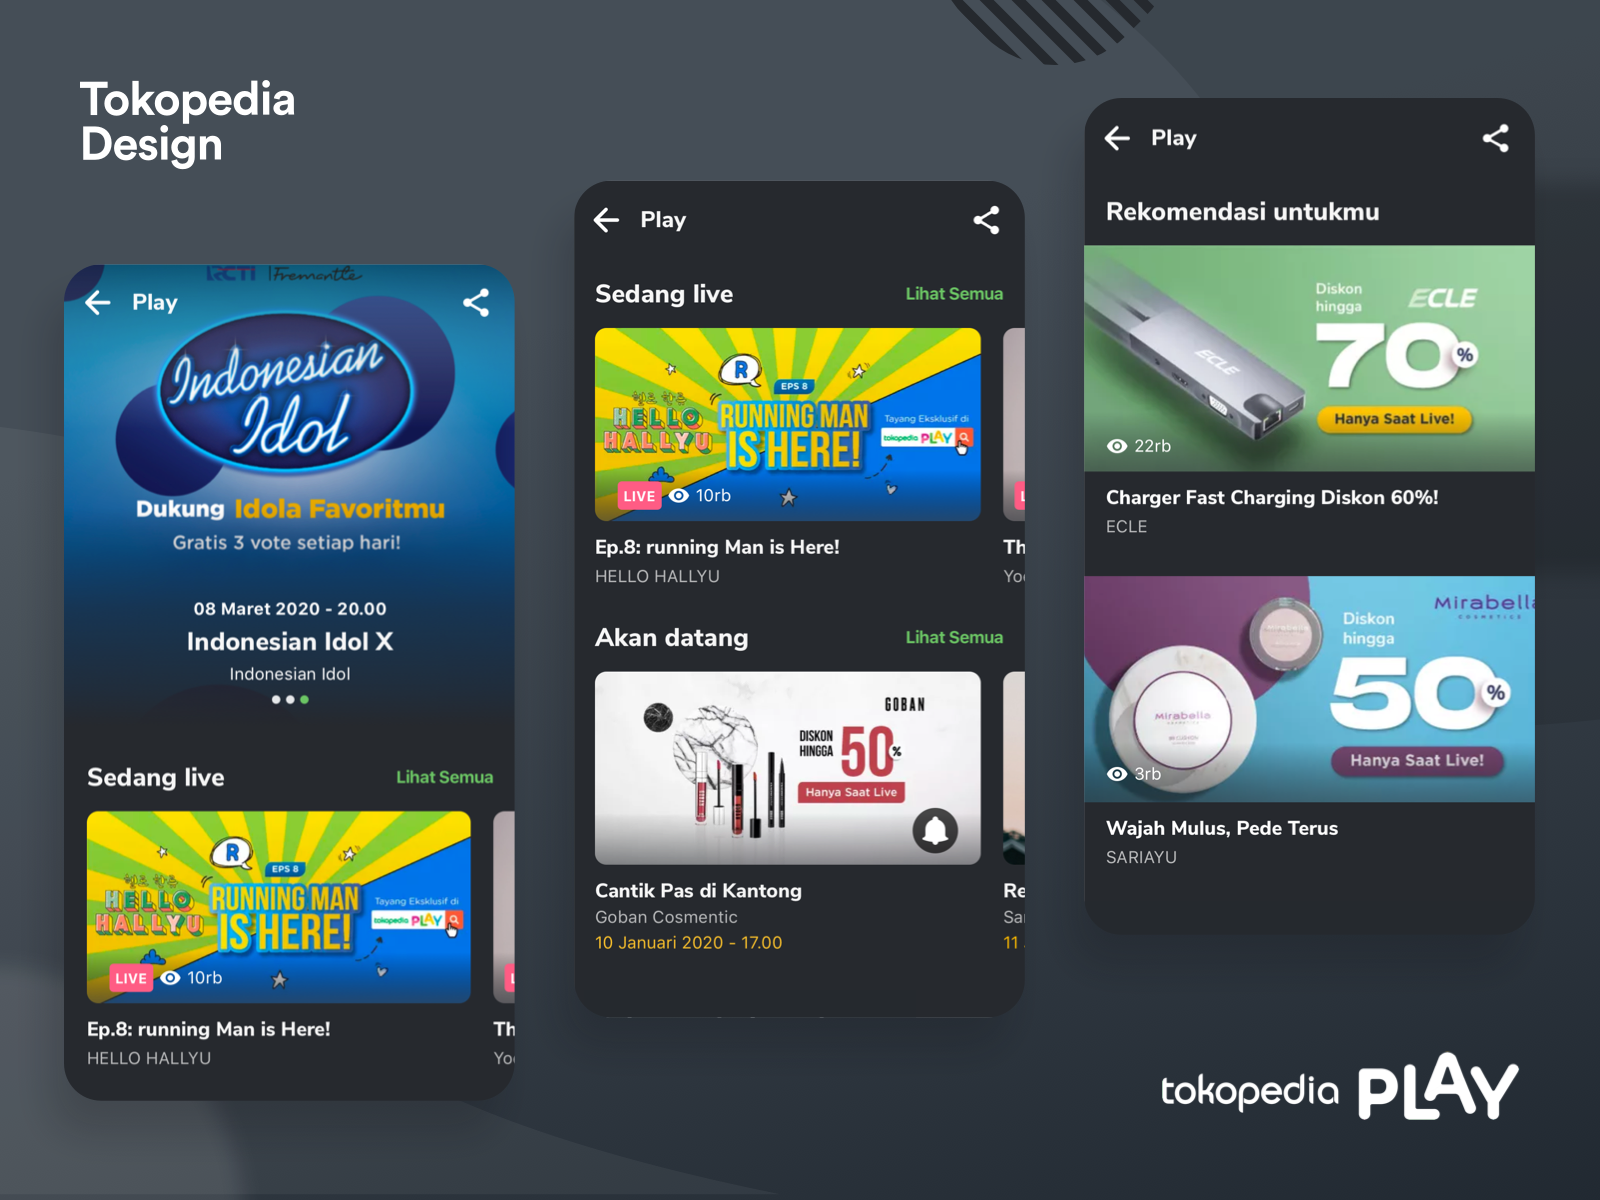  Tokopedia Play  Channel List by Nicholaus Gilang for 